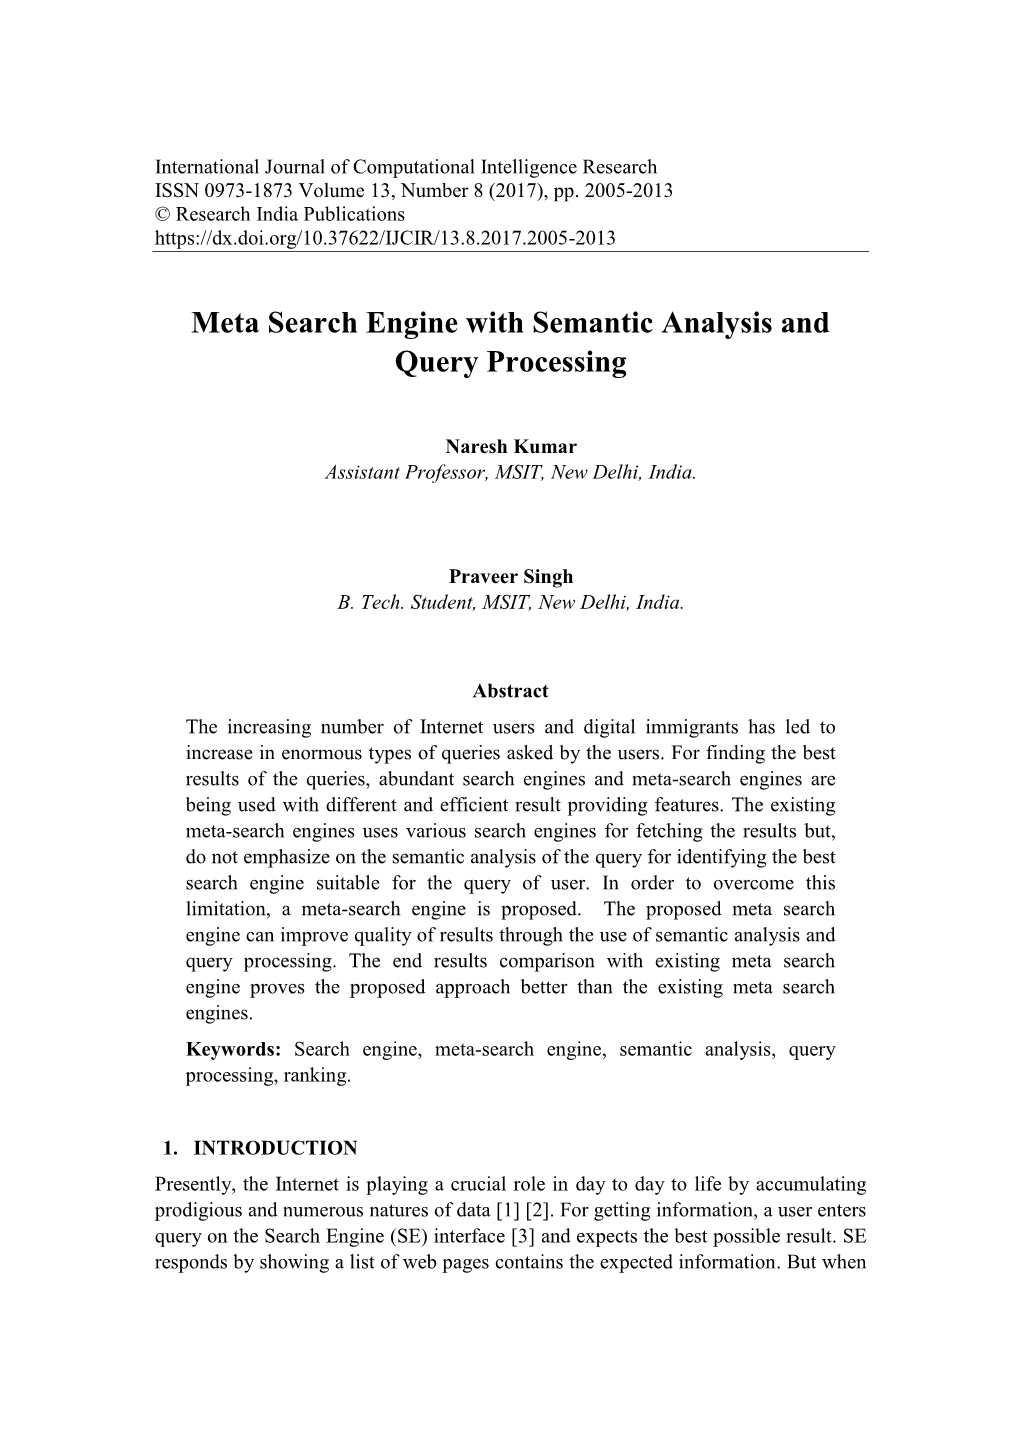 Meta Search Engine with Semantic Analysis and Query Processing